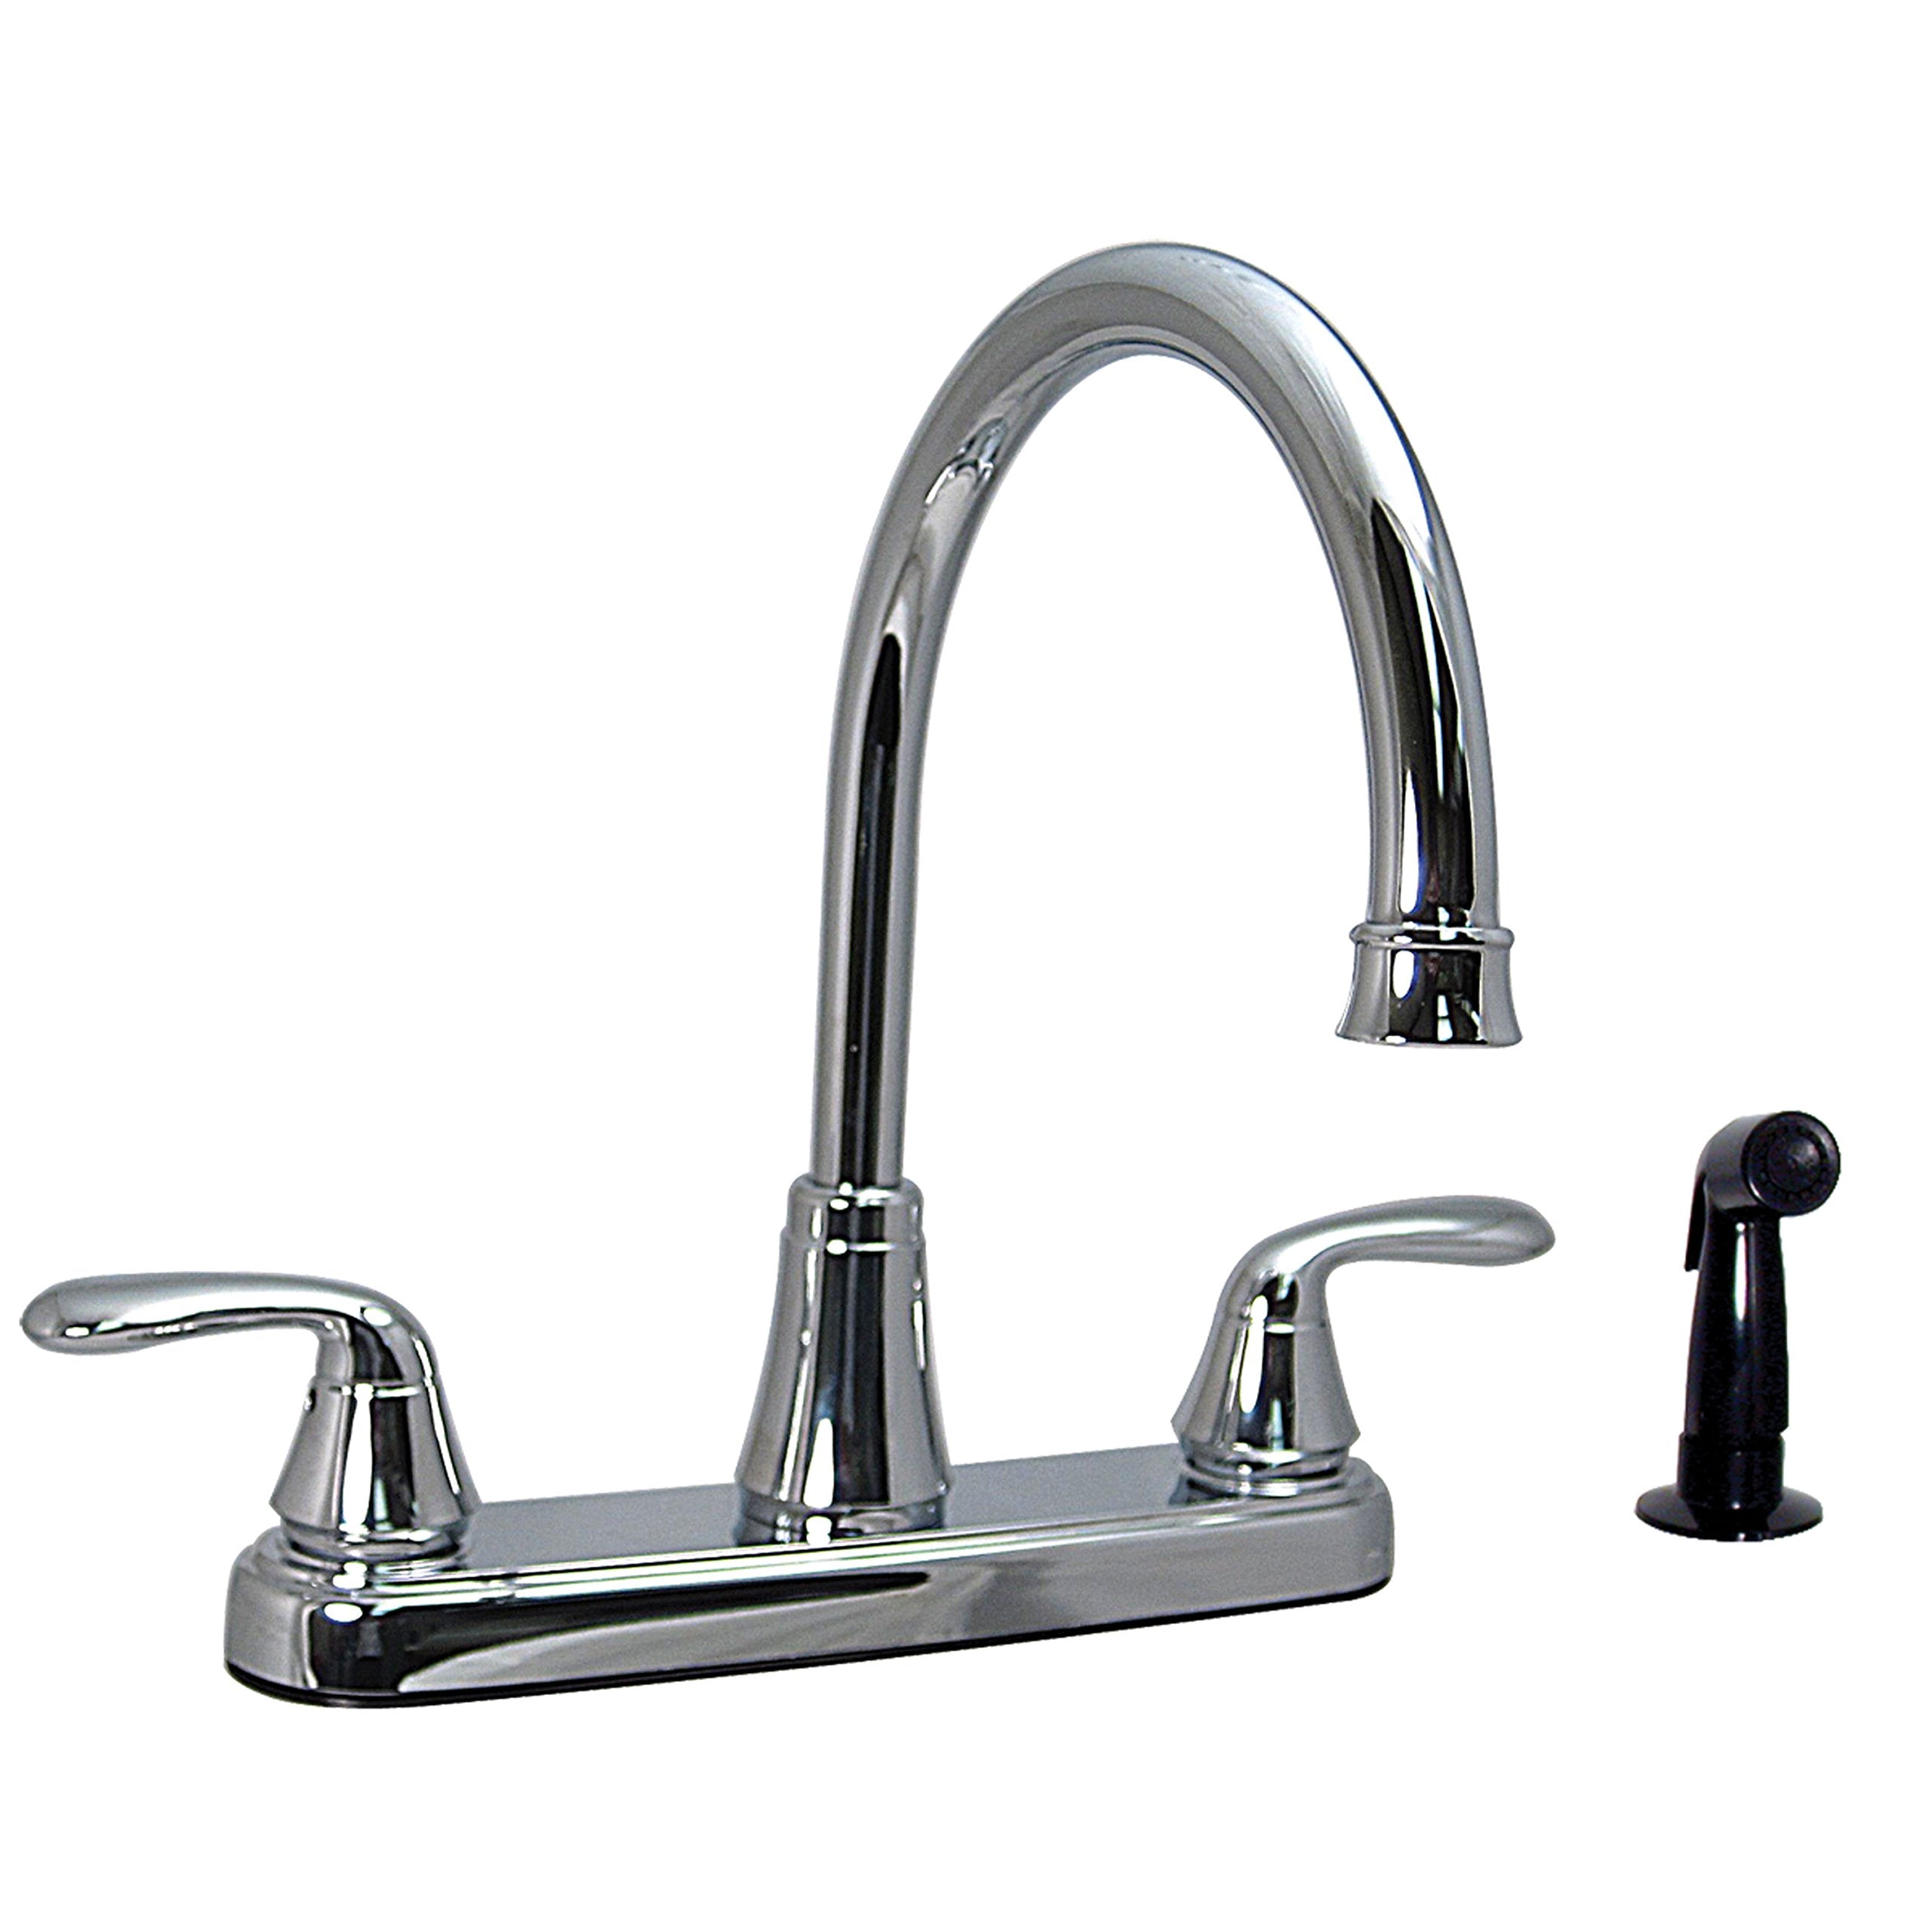 Phoenix PF231301 Two-Handle Kitchen High-Arc Faucet, Chrome with Side Sprayer